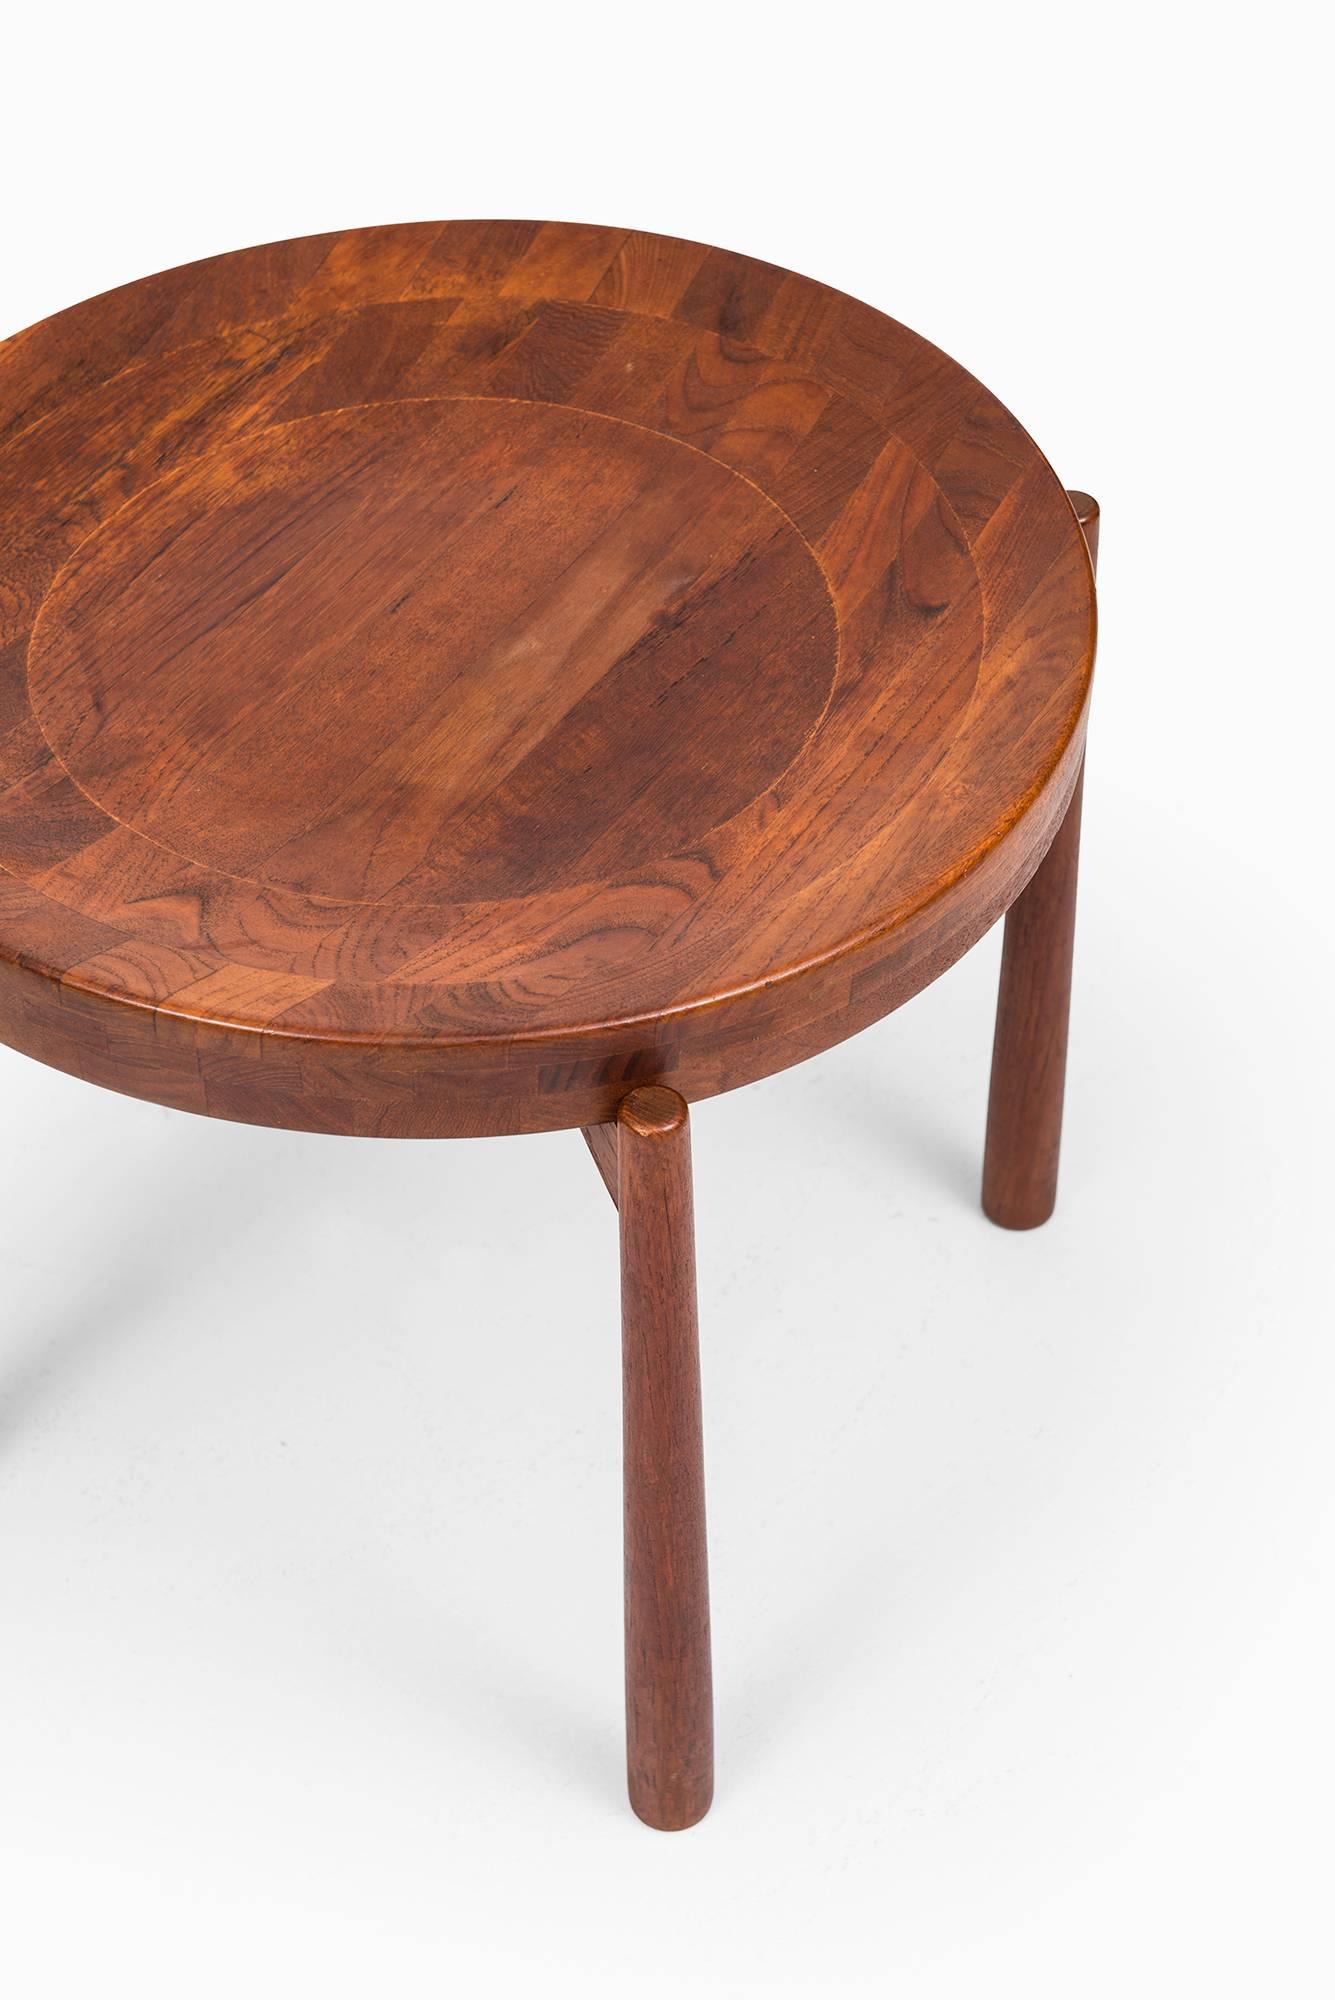 Mid-20th Century Jens Quistgaard a Pair of Side Tables Produced by Nissen in Denmark